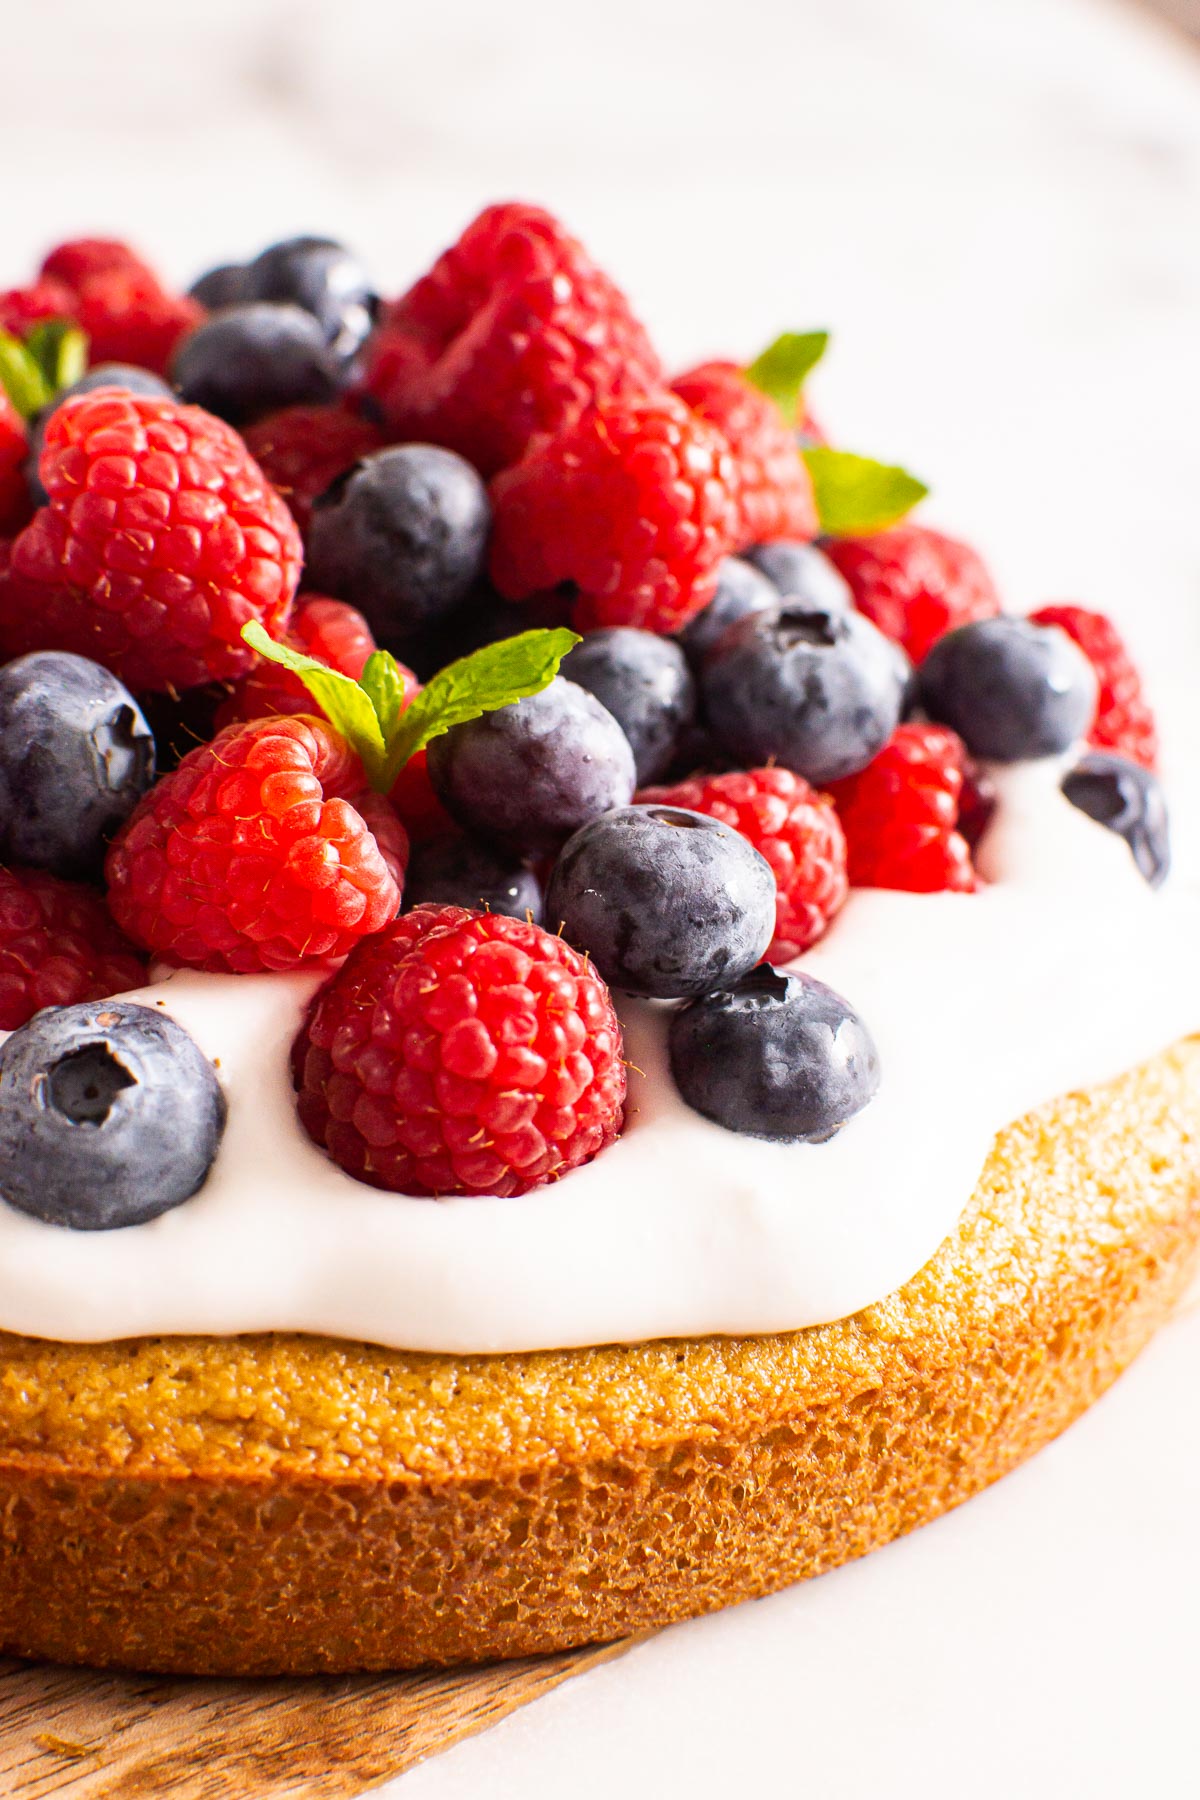 Almond flour cake topped with whipped cream, blueberries and raspberries.